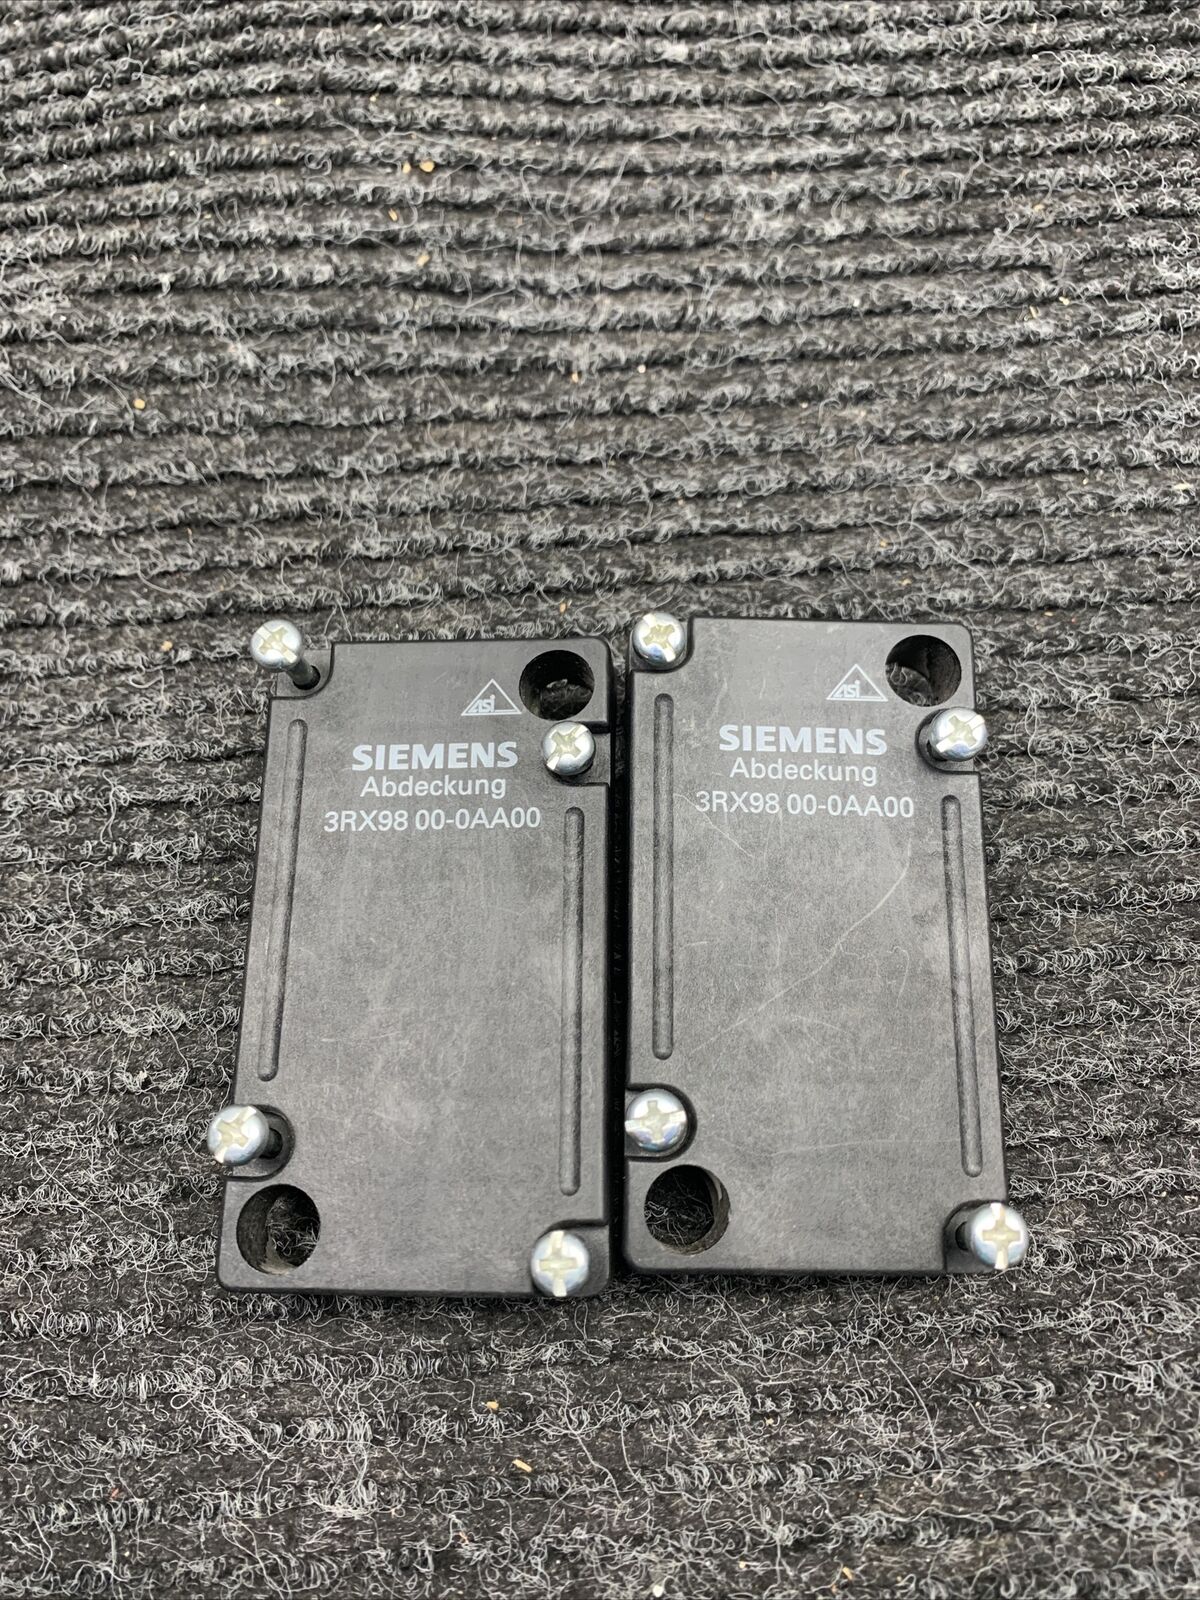 Lot of 2 Siemens 3RX9800-0AA00 Receptacle Cover